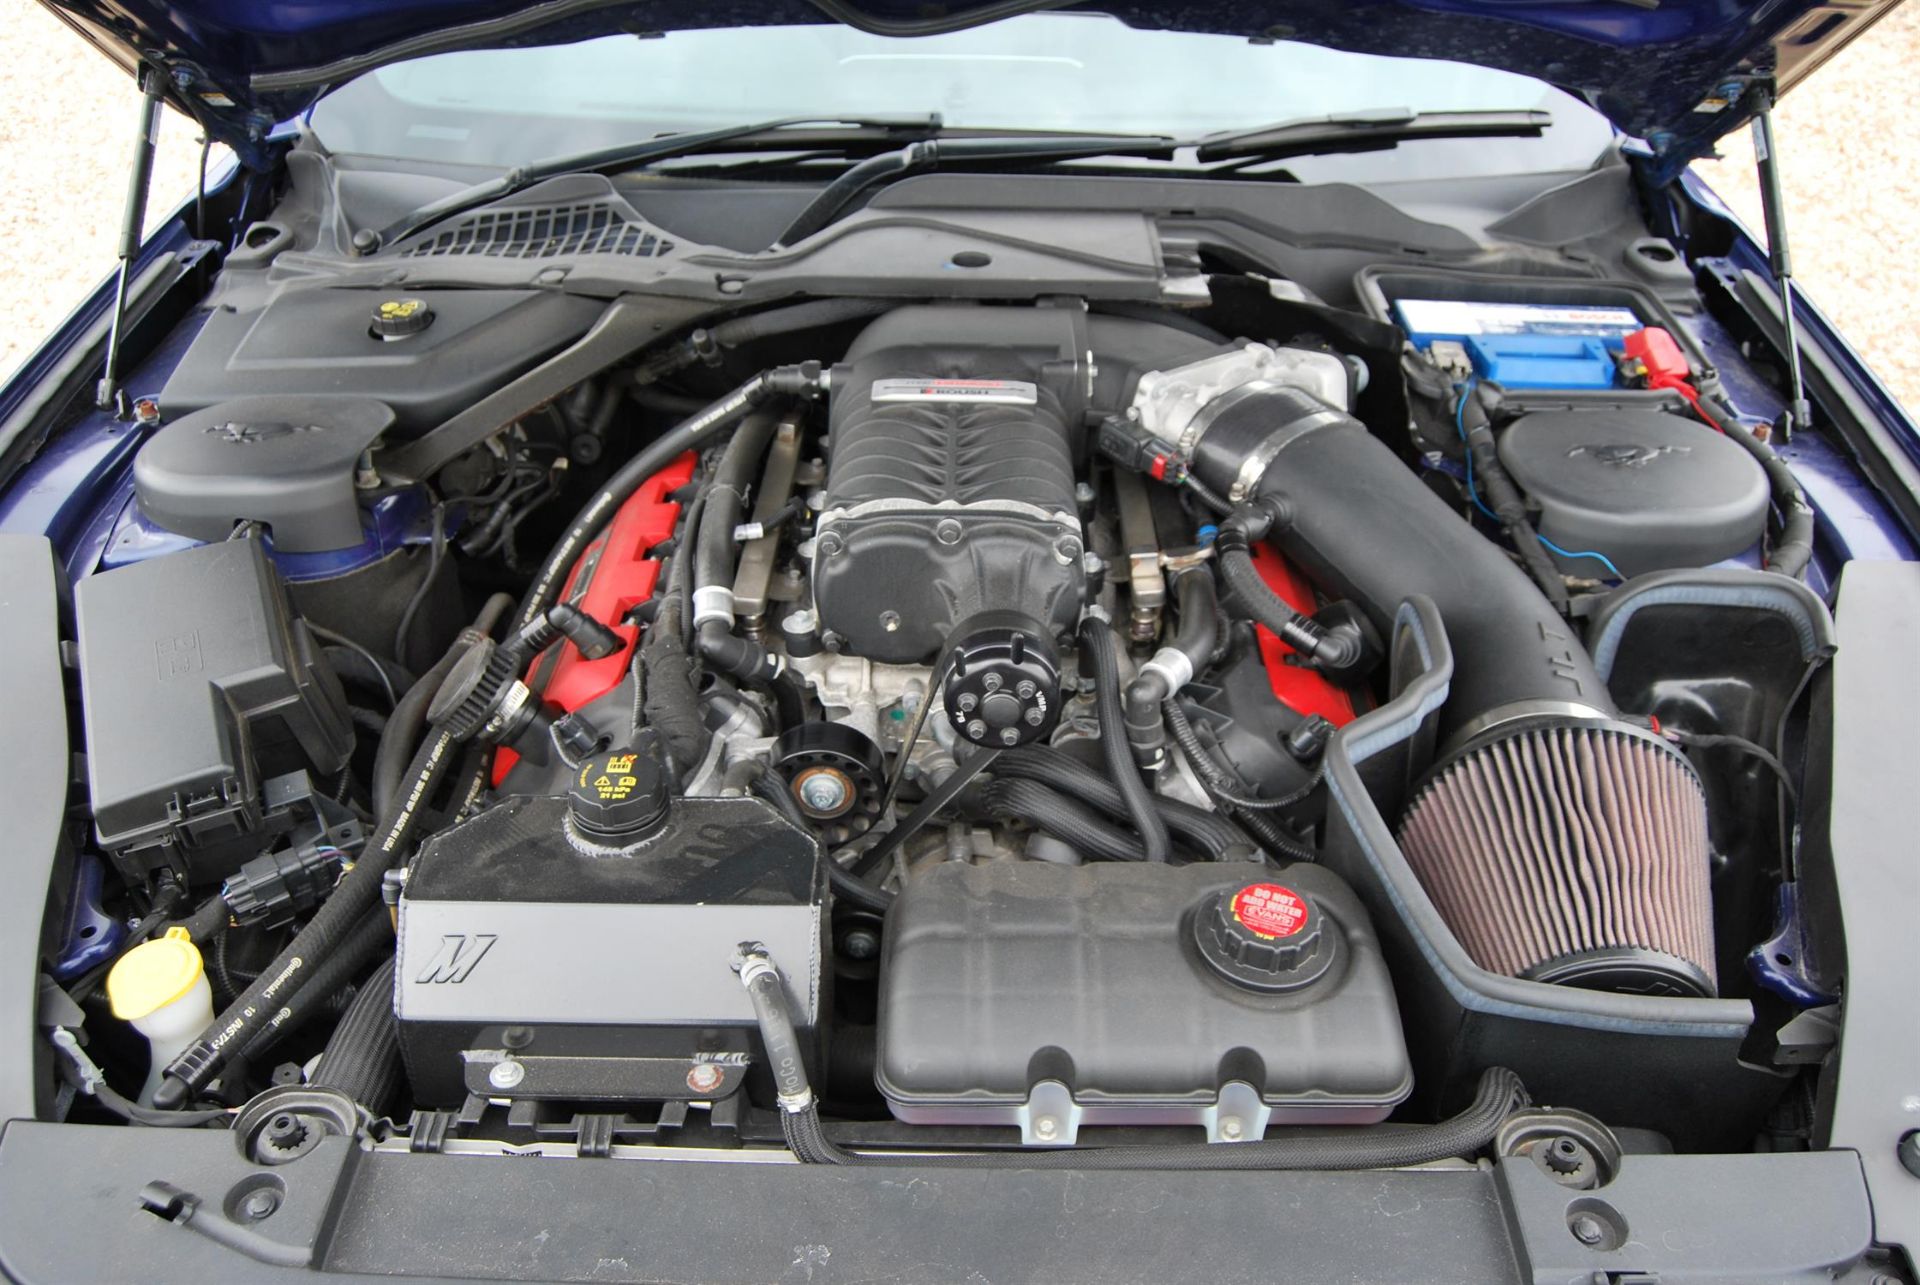 2016 Ford Mustang 5.0-Litre V8 GT S550 Roush Supercharged - Image 3 of 10